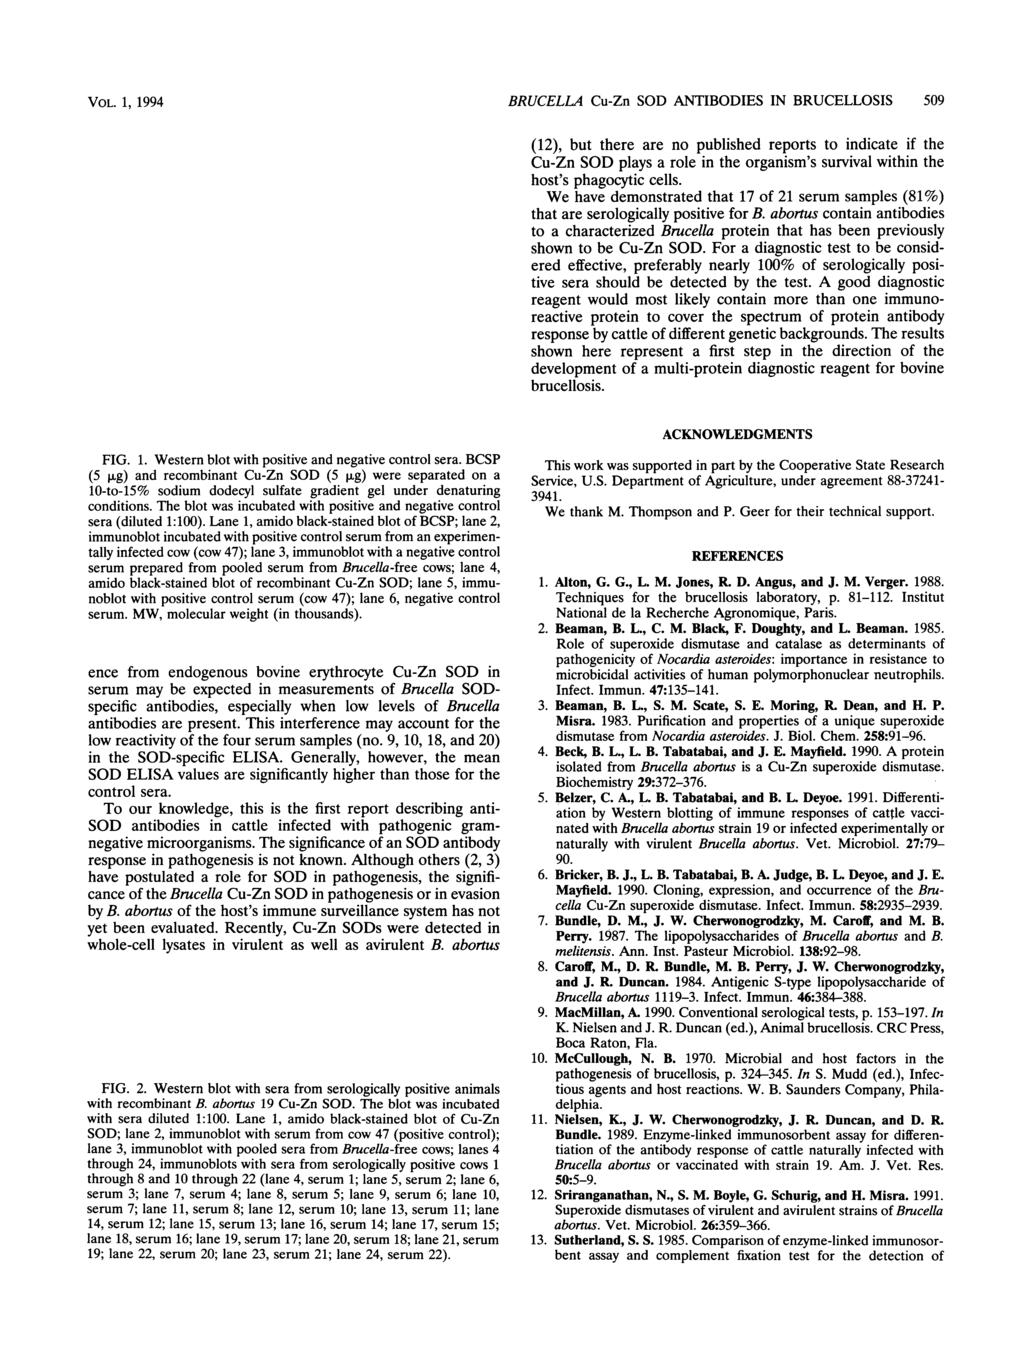 VOL. 1, 1994 BRUCELLA Cu-Zn SOD ANTIBODIES IN BRUCELLOSIS 509 MW 1 2 66-45 - 36-21 - 29-- 24-14- 3 4 5 6 (12), but there are no published reports to indicate if the Cu-Zn SOD plays a role in the